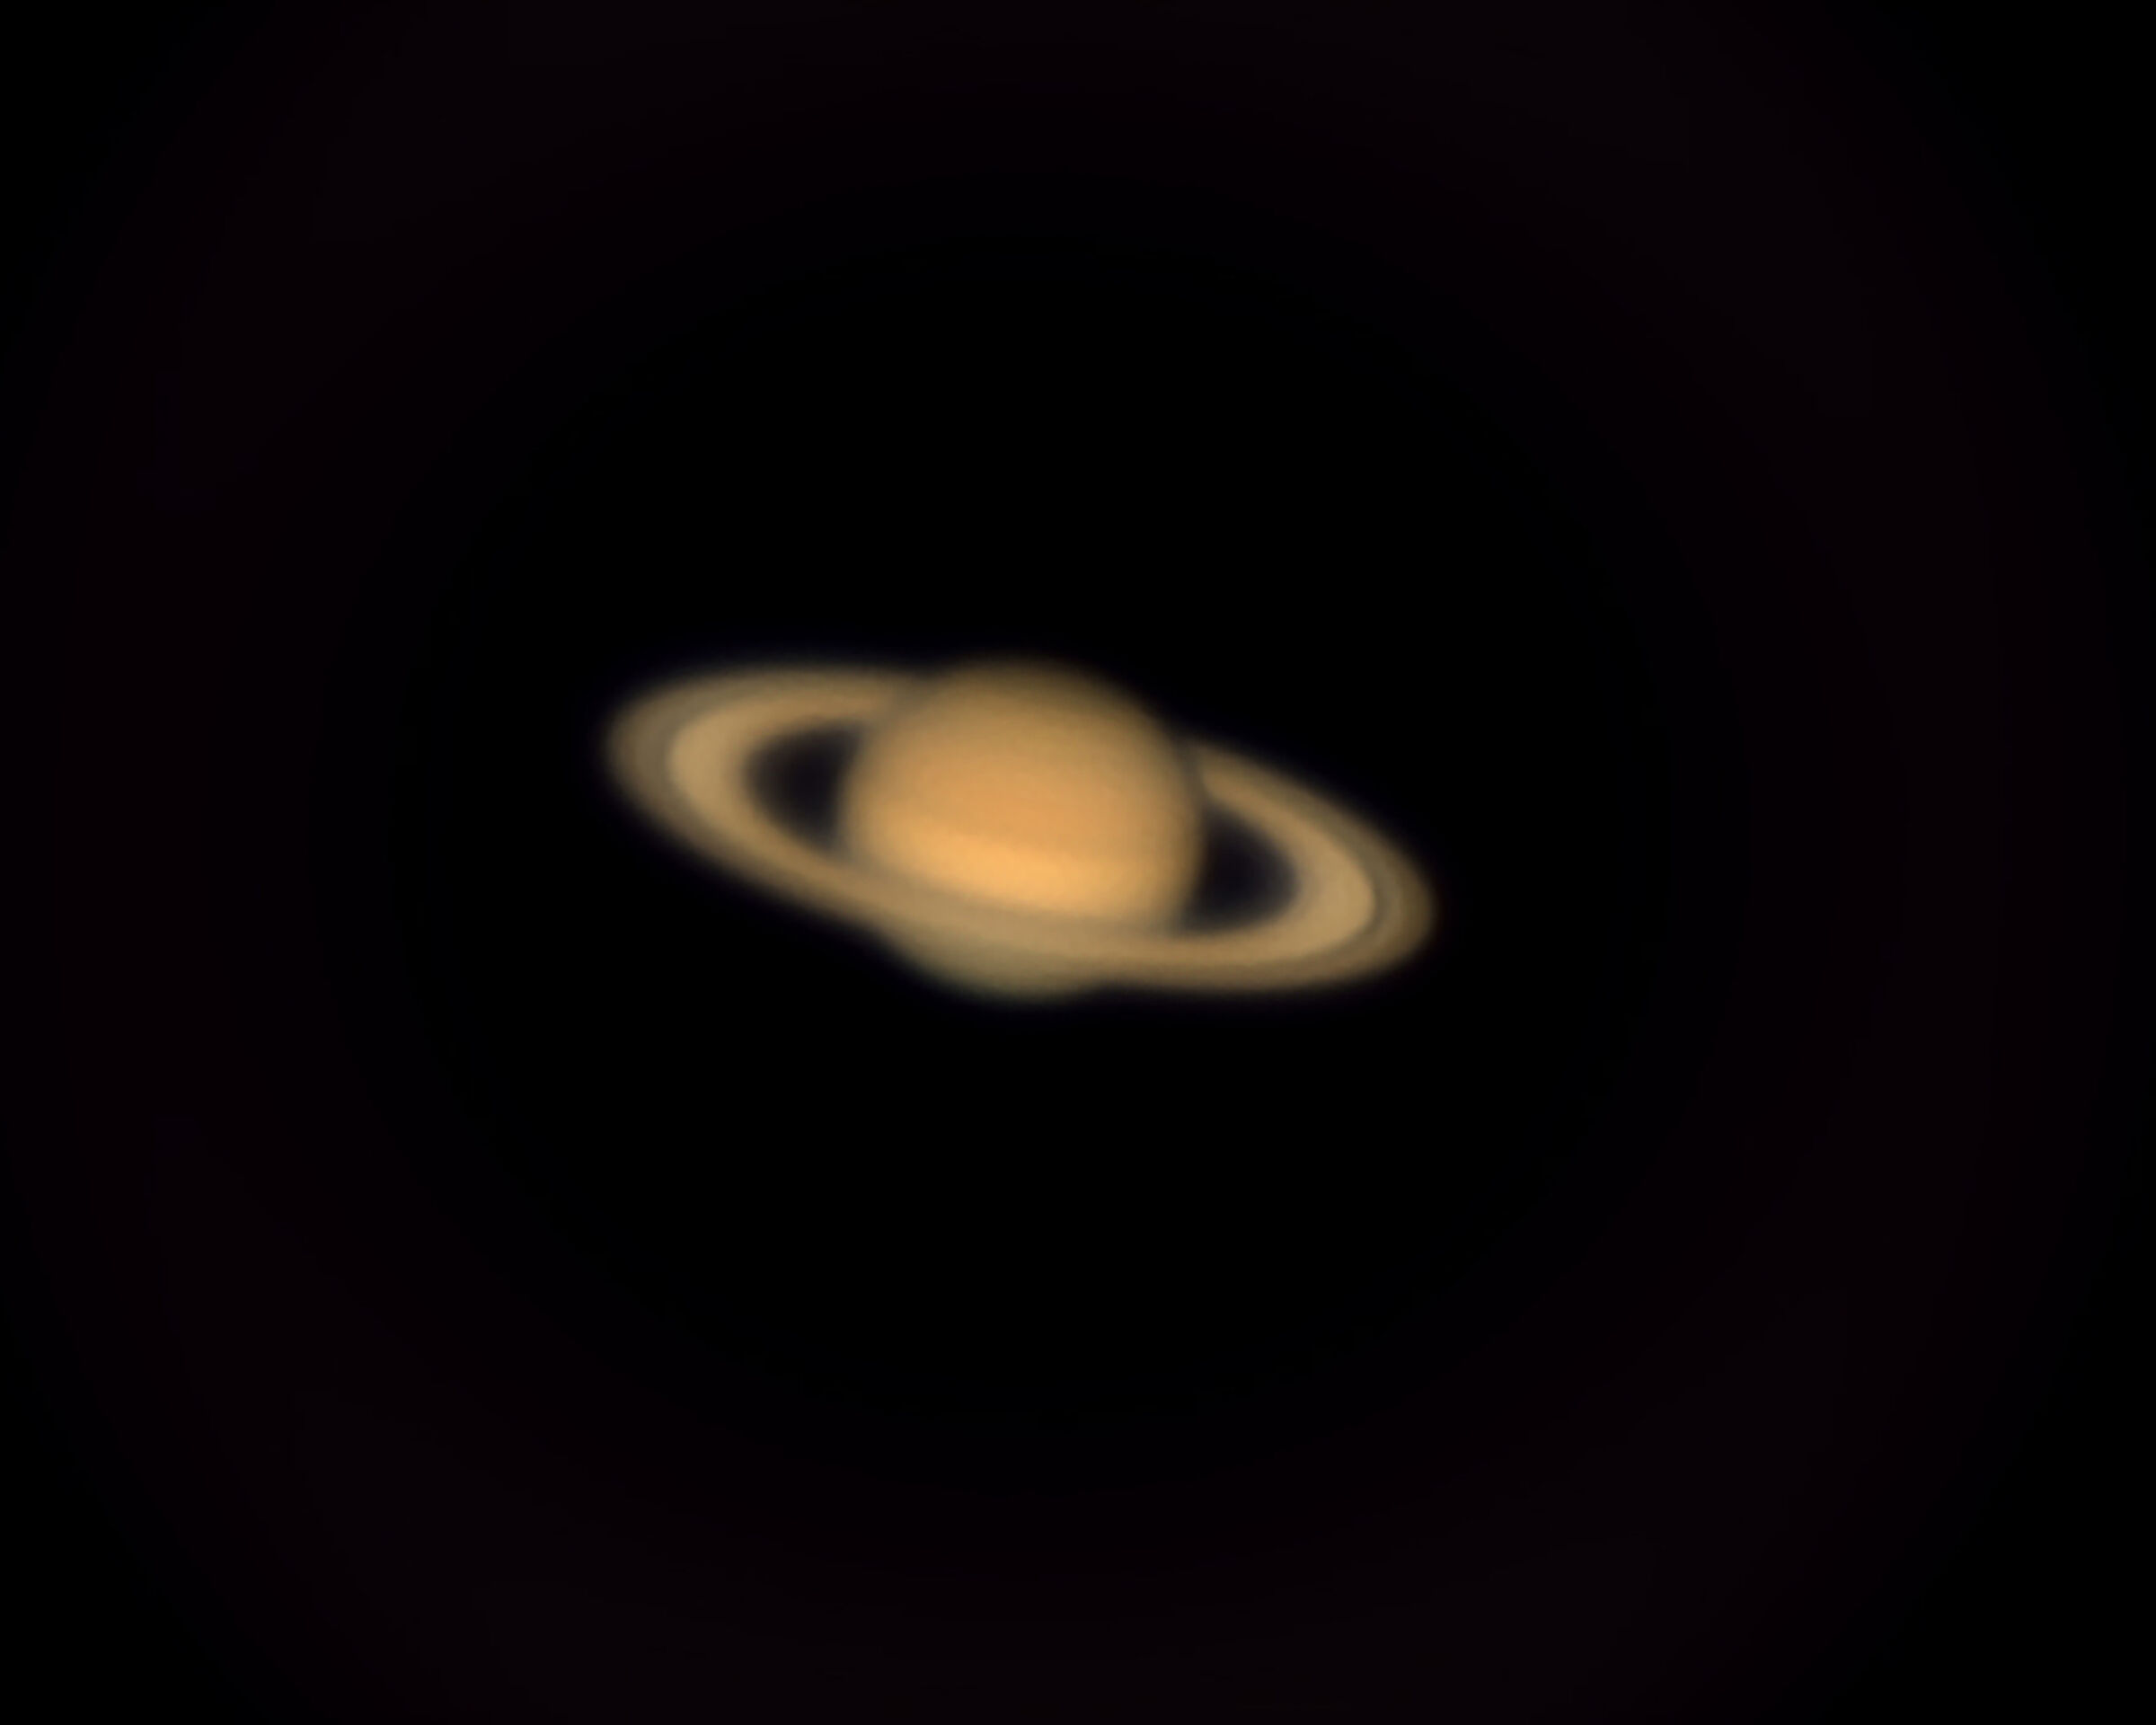 Saturn in all its splendor (revisited ... !)...